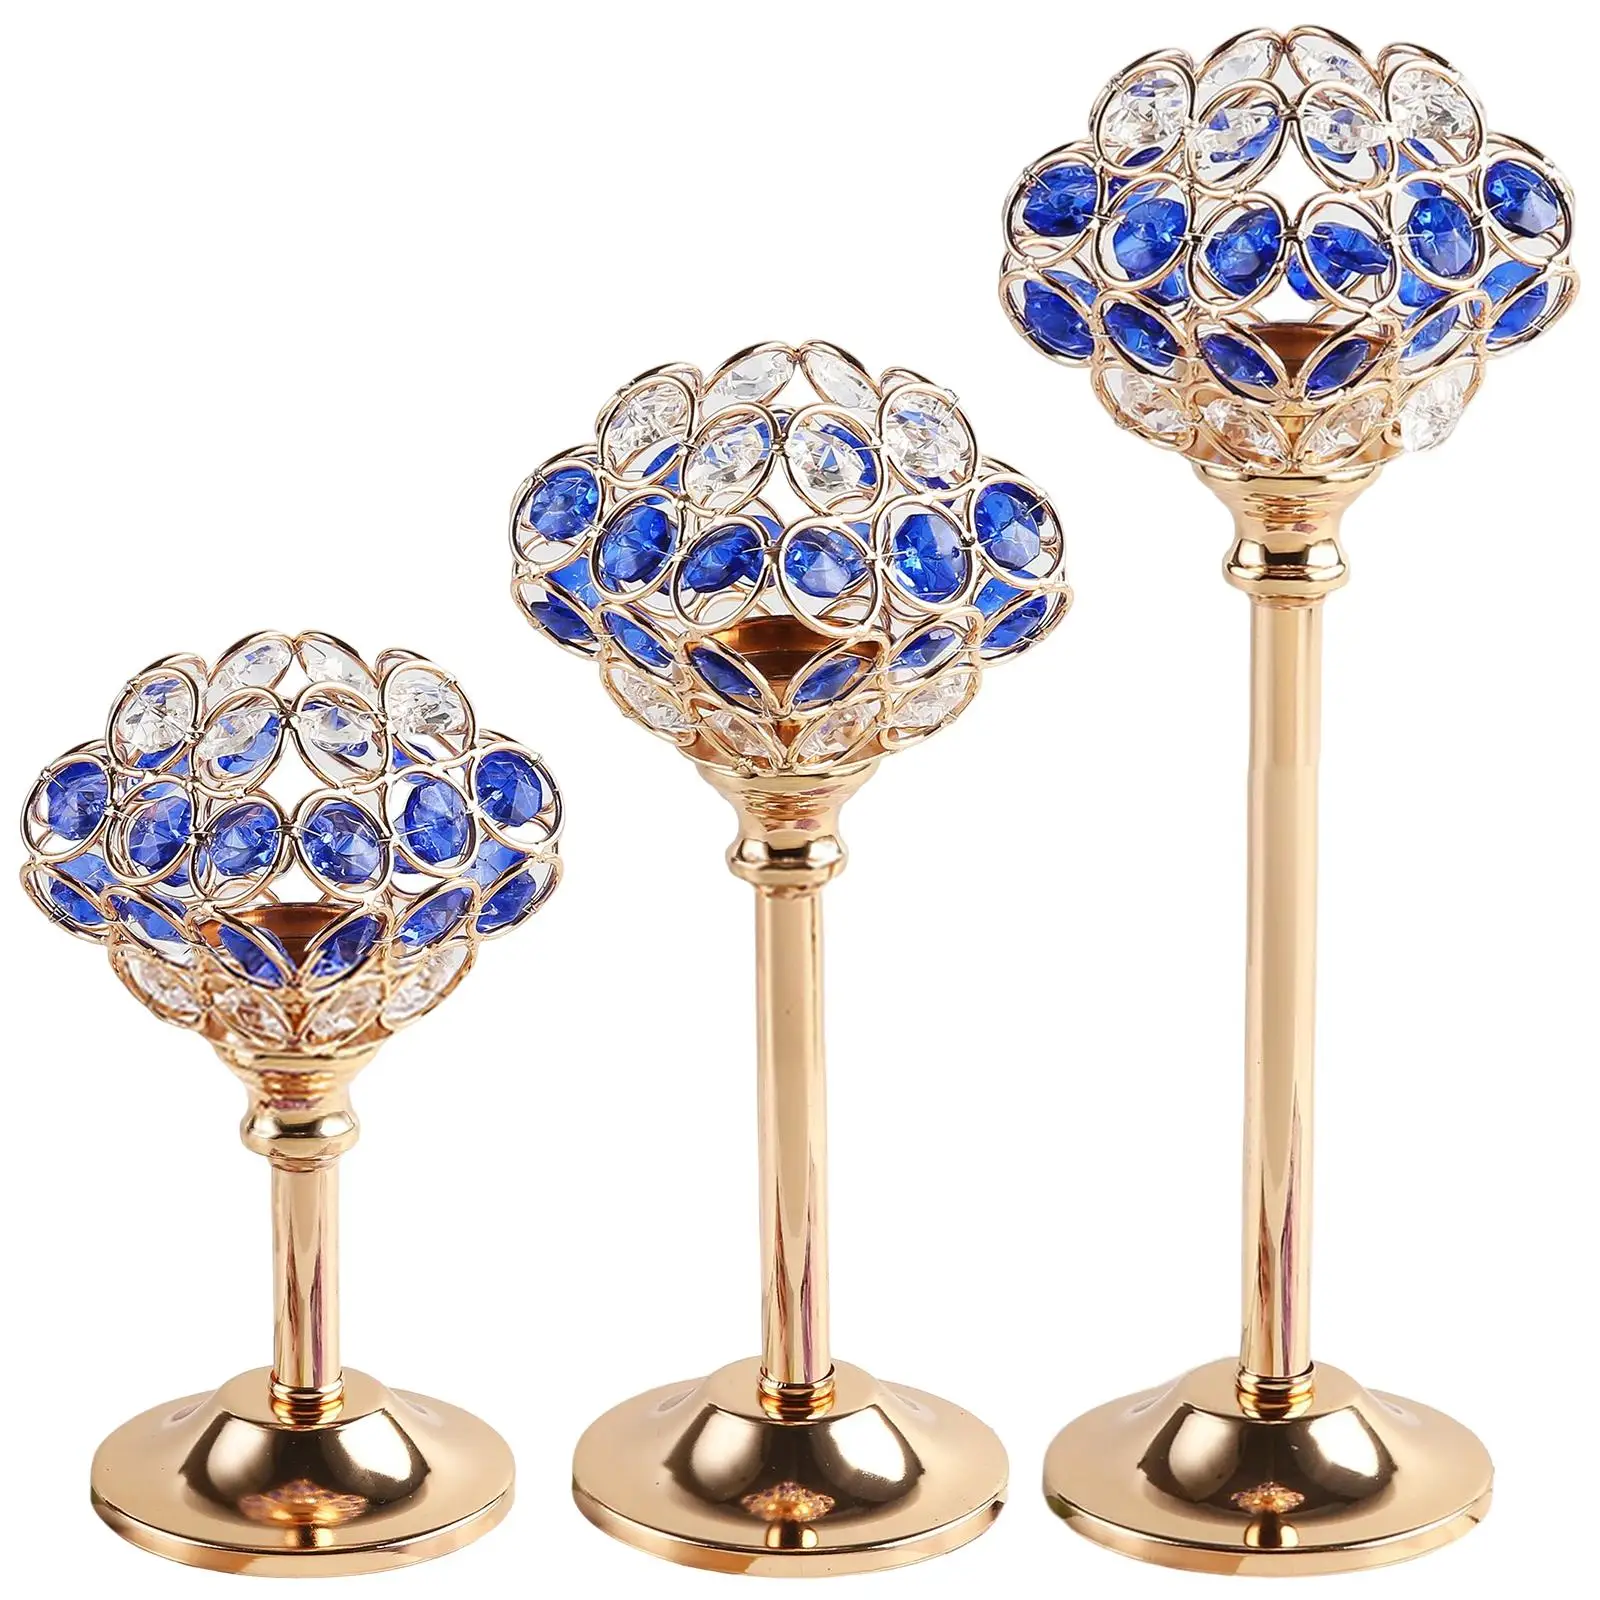 Luxury Candlestick Stand Plated Blue Crystal Candle Holder for Decorative